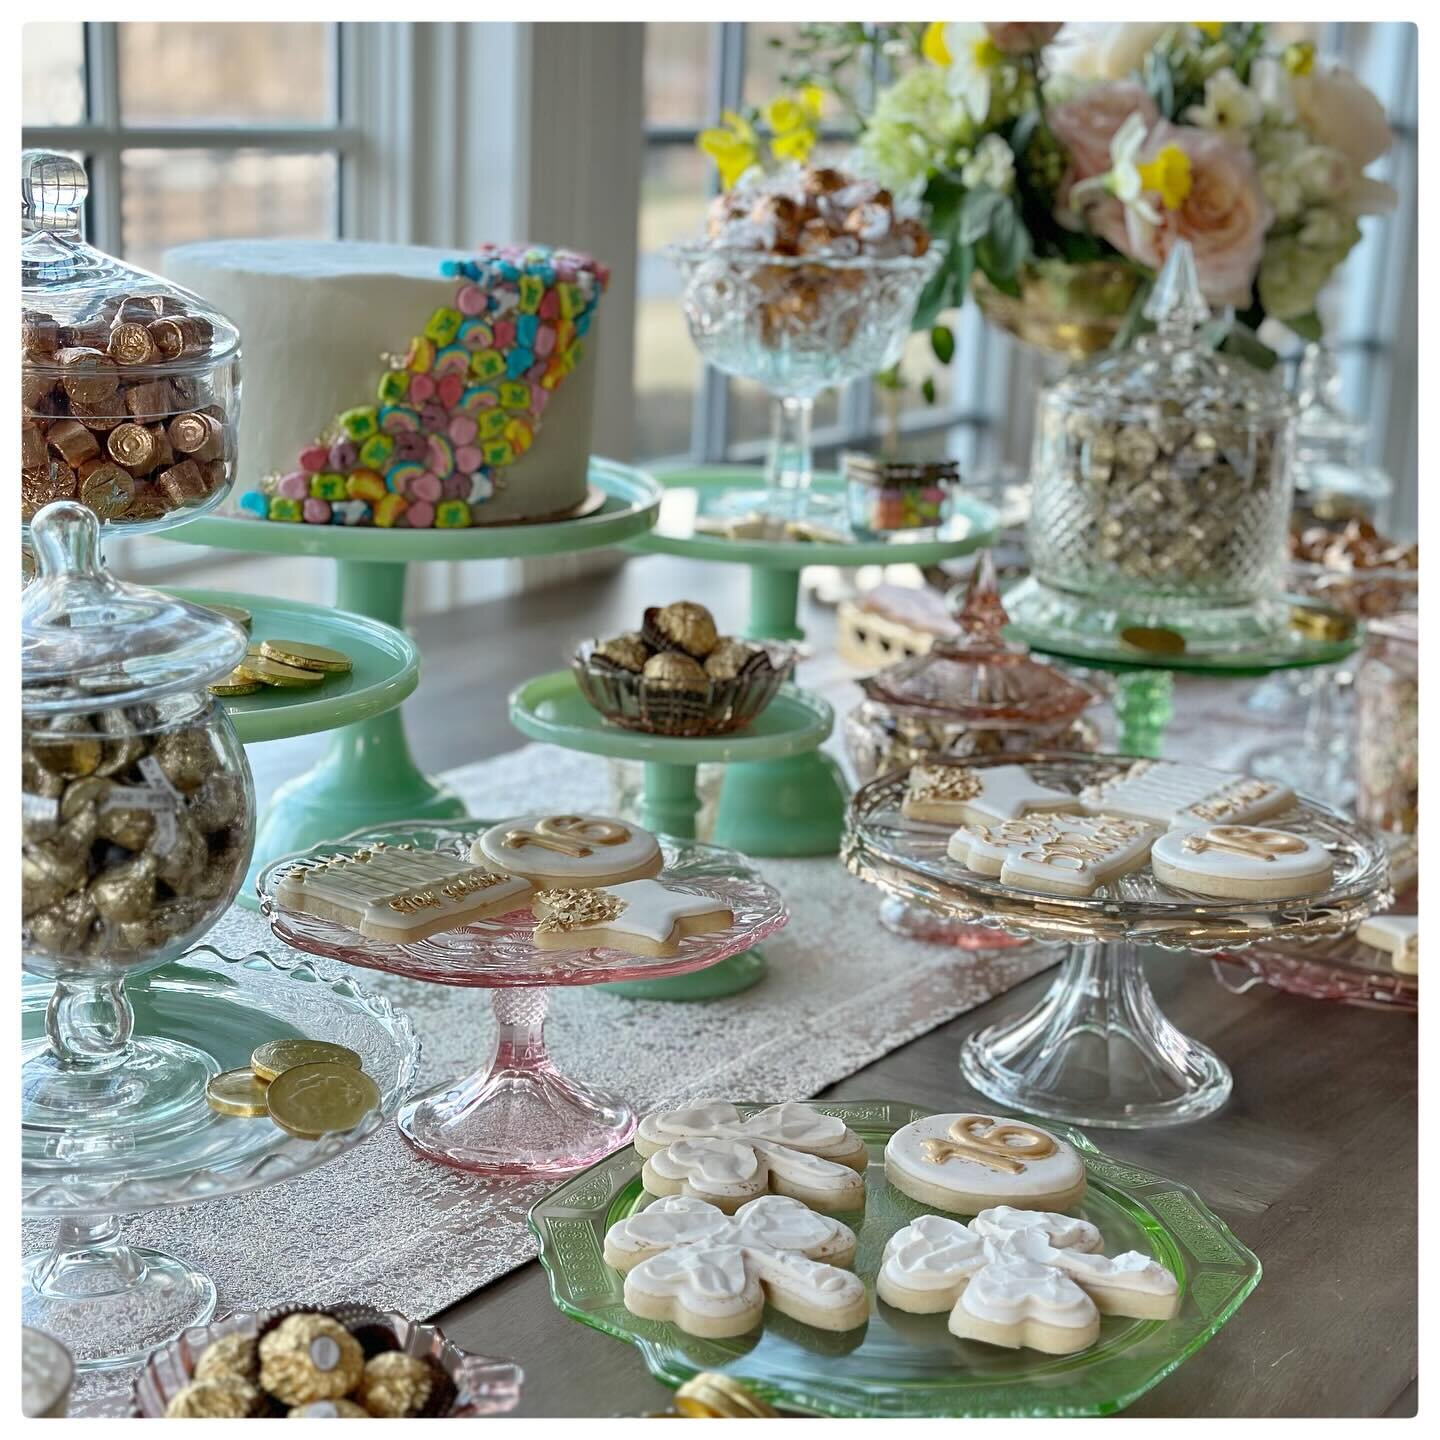 magically delicious 🌈 dessert table for a golden sweet sixteen that fell on st patricks day. epic cake and cookie suite by @peace_love_cookies_llc #luckycharms #magicallydelicious #stpatricksday #sweetsixteen #goldenbirthday #eventstyling #elliestyl